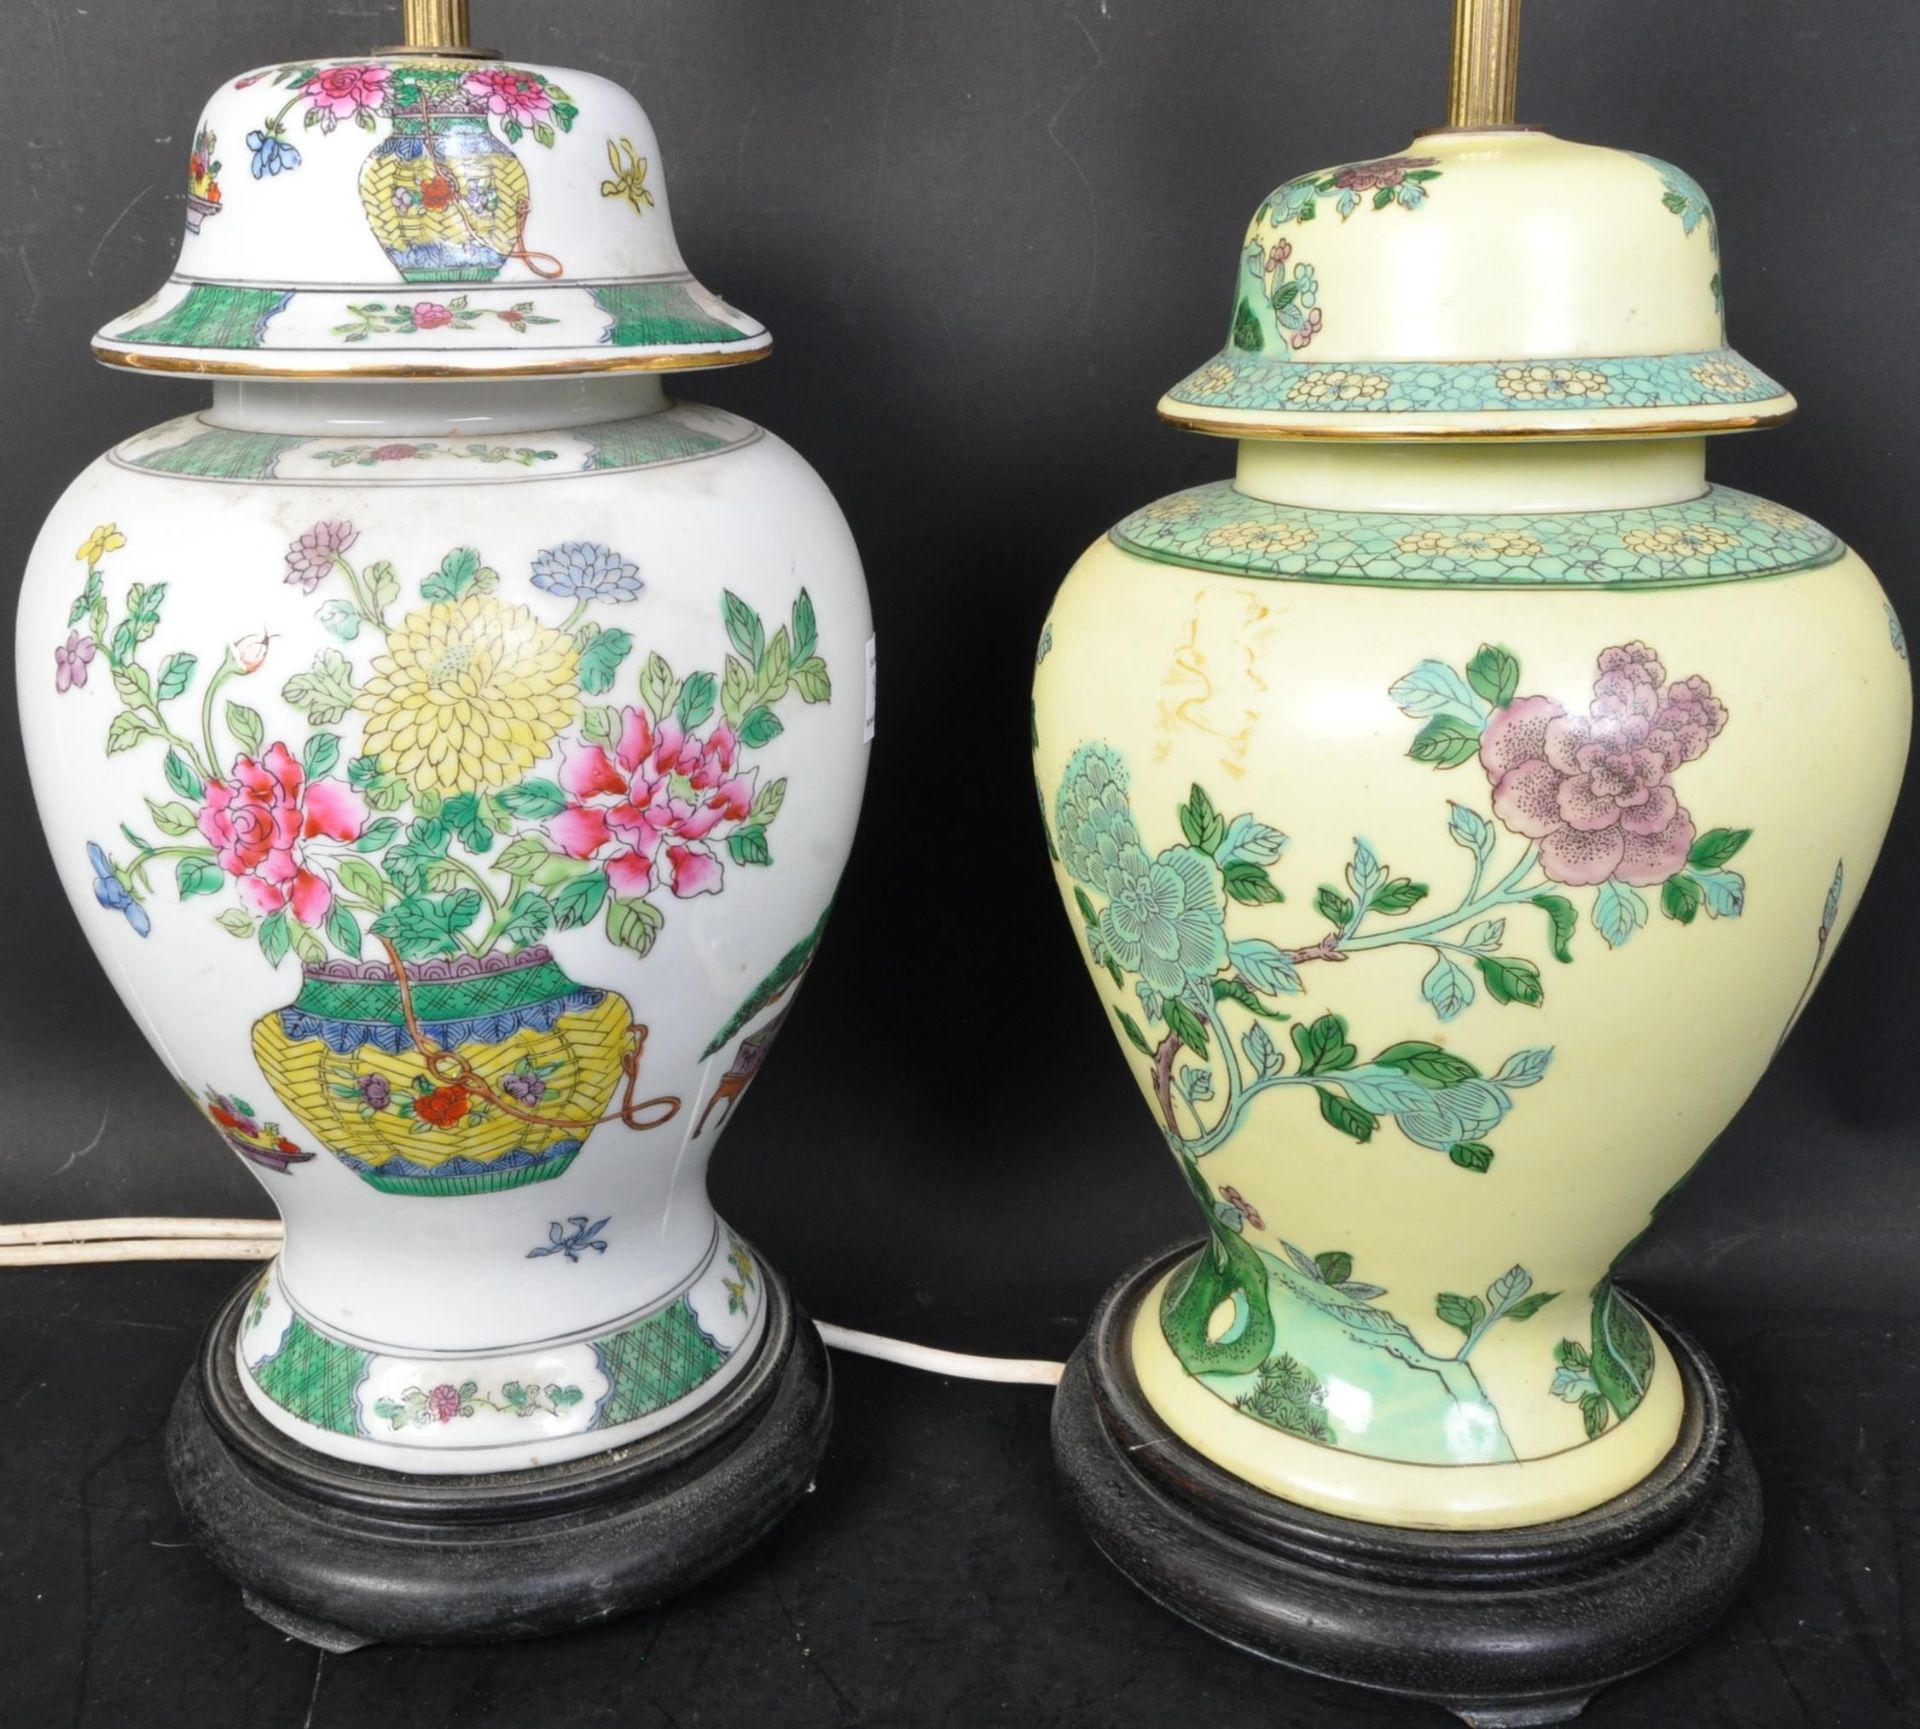 PAIR OF CHINESE FAMILLE ROSE PORCELAIN VASE LAMPS - Image 2 of 5